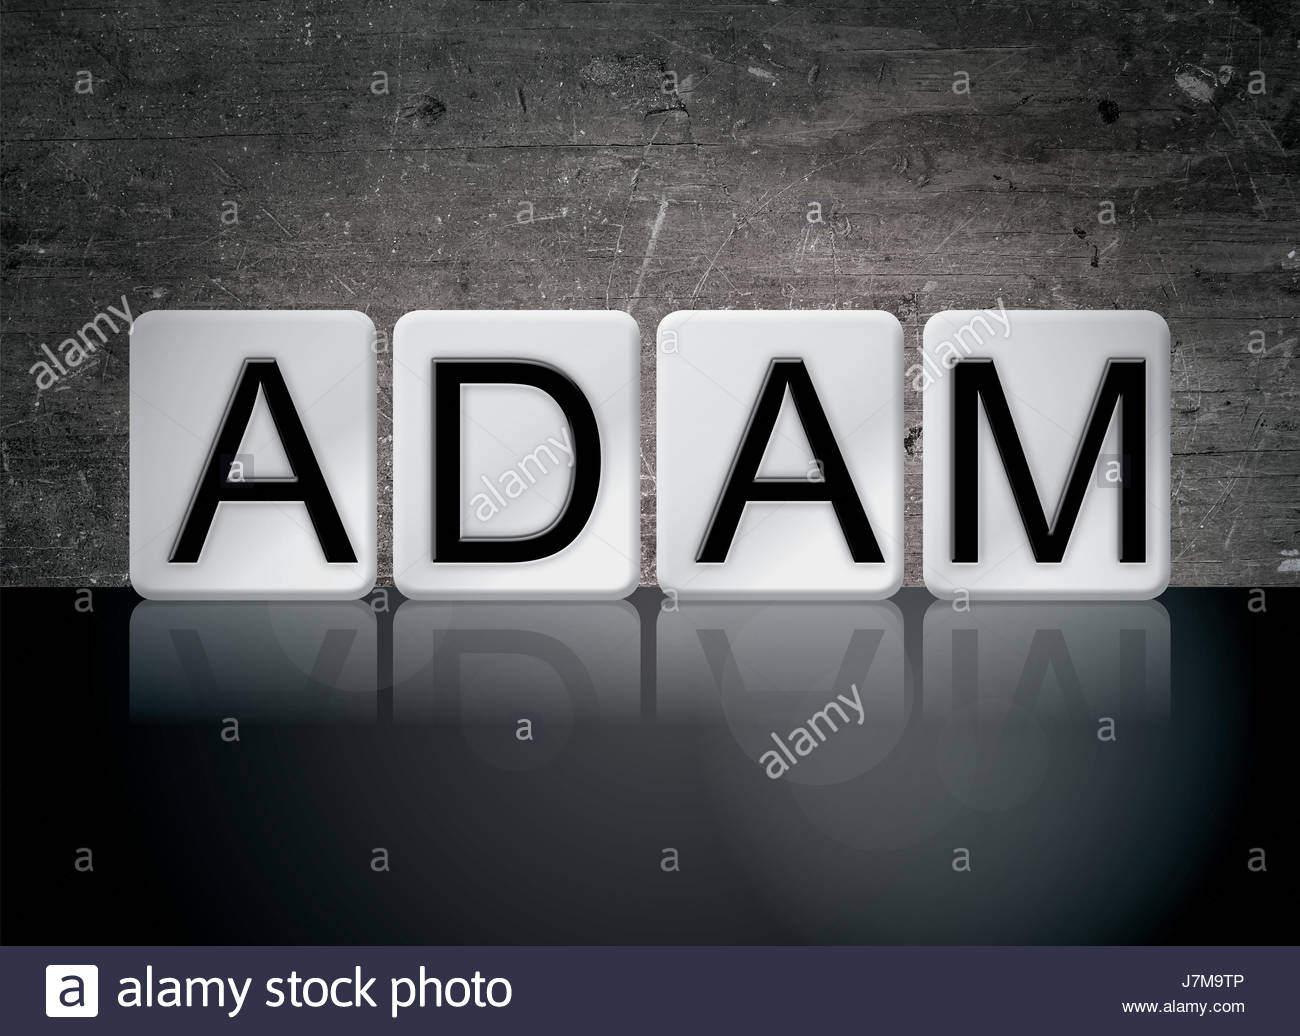 The Name Adam Concept And Theme Written In White Tiles On A Dark